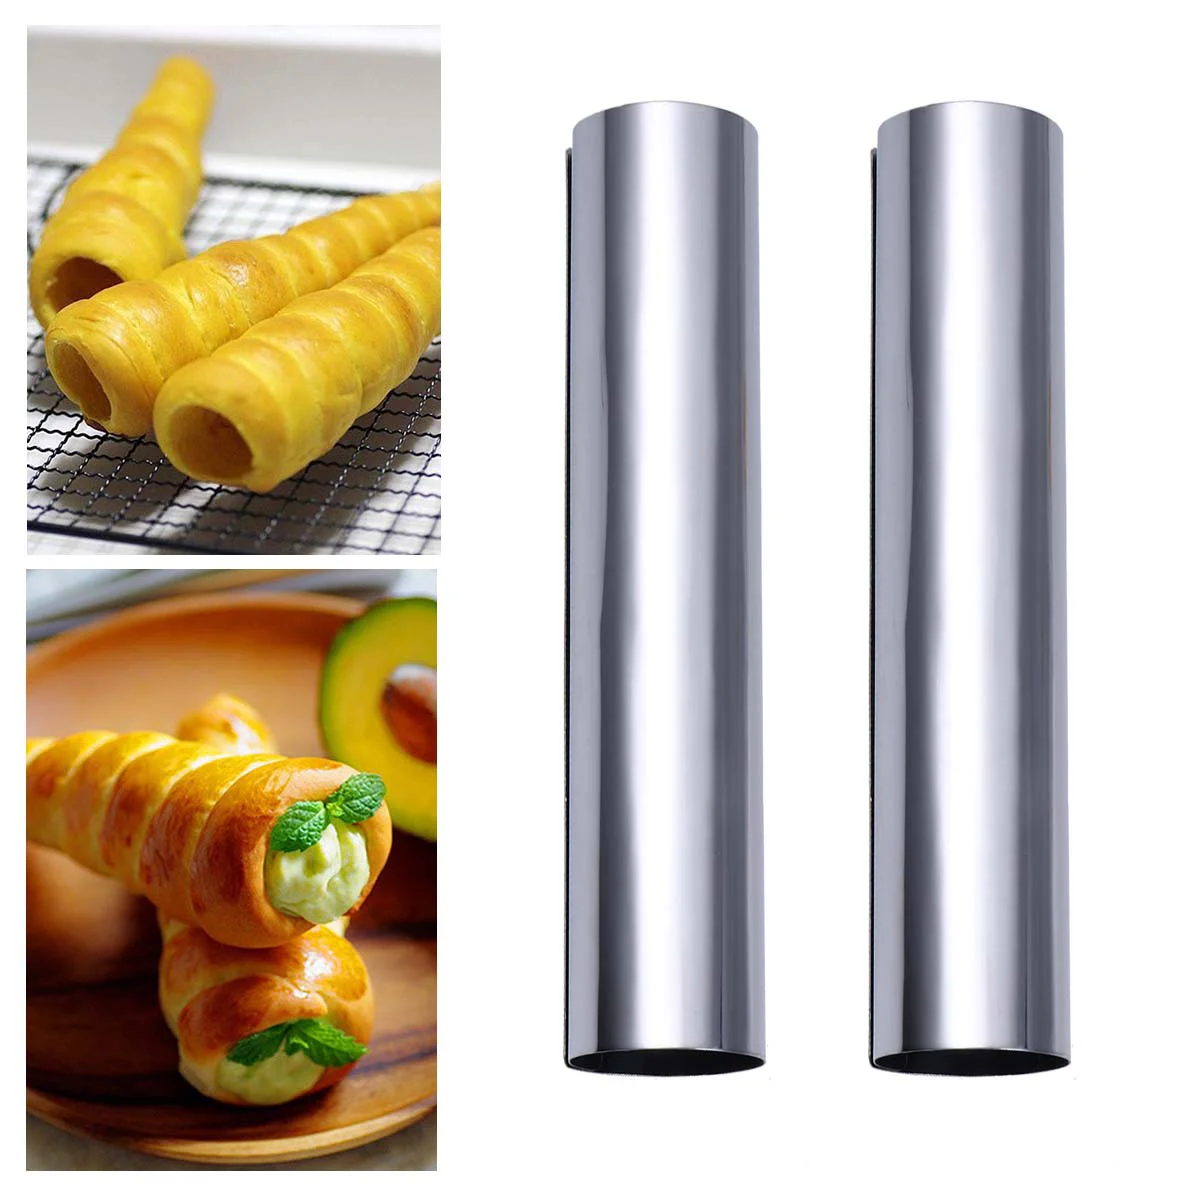 Cannoli Tubes Molds Cream Baking Tube Forms Horn Pastry Croissant Steel Stainless Connoli Form Shell Roll Bread Metal Cones